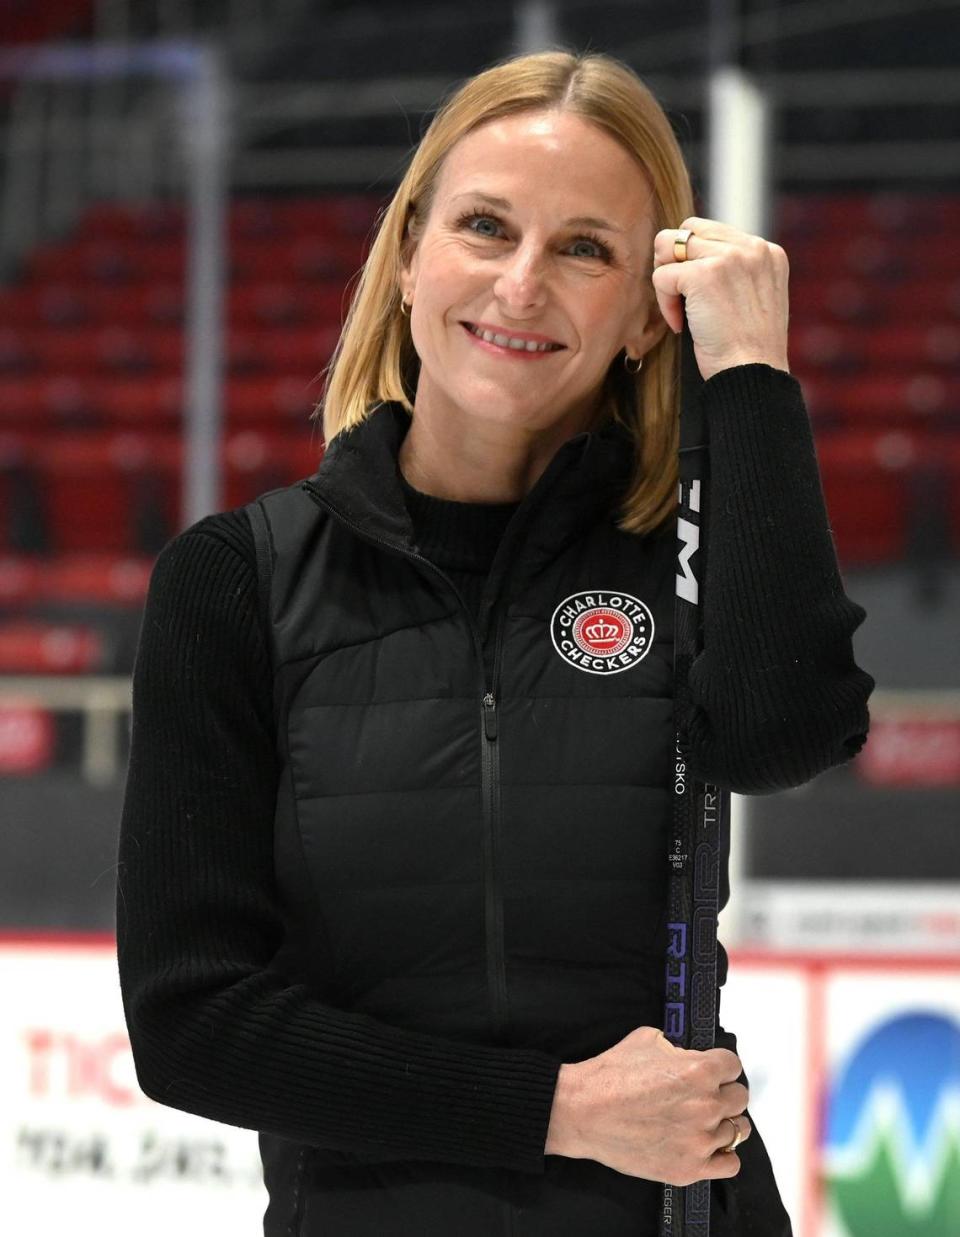 Charlotte Checkers chief operating officer Tera Black is the driving force behind the Charlotte Checkers. JEFF SINER/jsiner@charlotteobserver.com